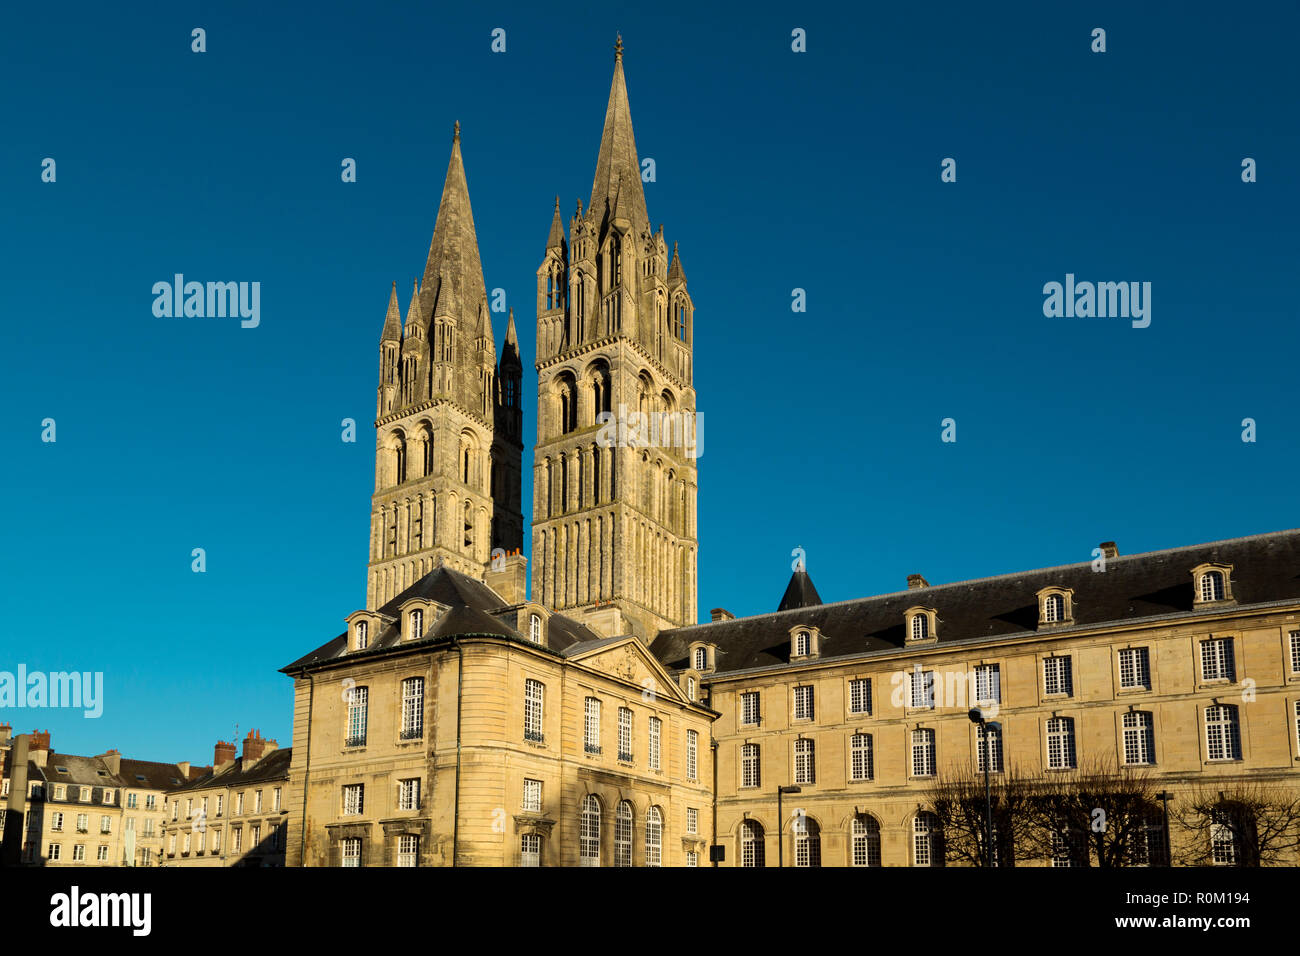 The Abbey of Saint-Étienne church, also known as Abbaye aux Hommes founded in 1063 Stock Photo